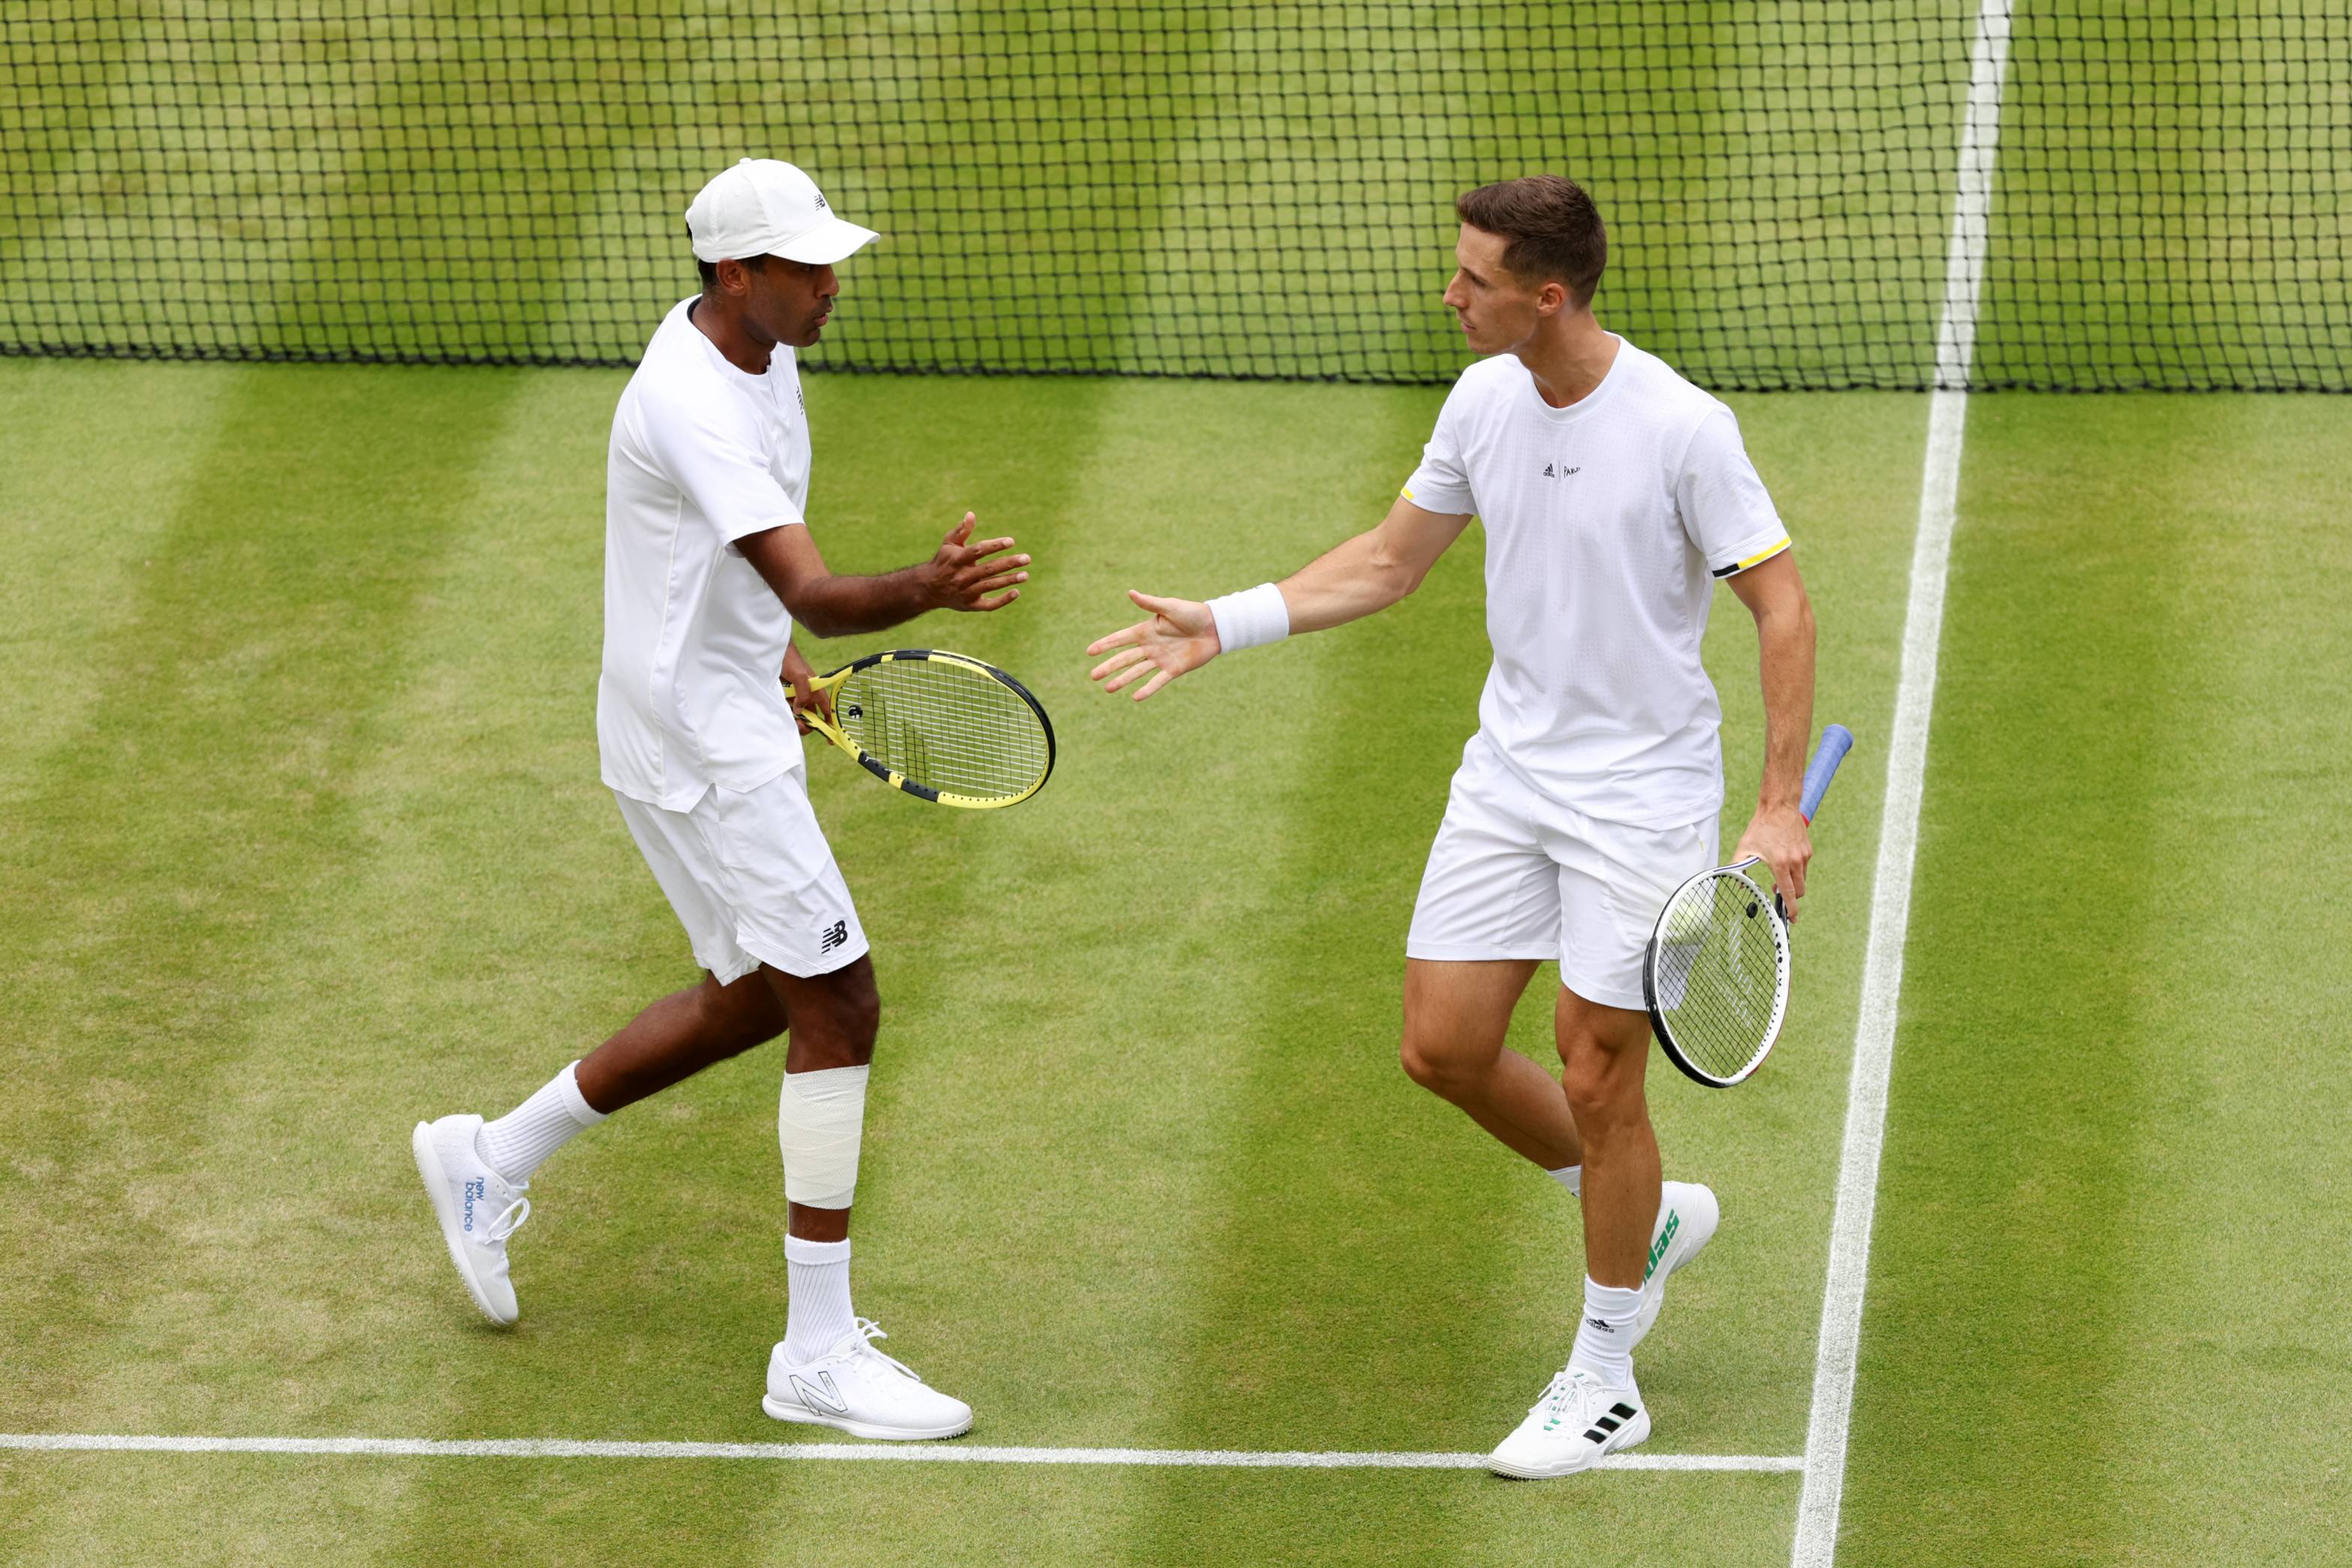 Wimbledon 2022: Britwatch - which British players are competing?